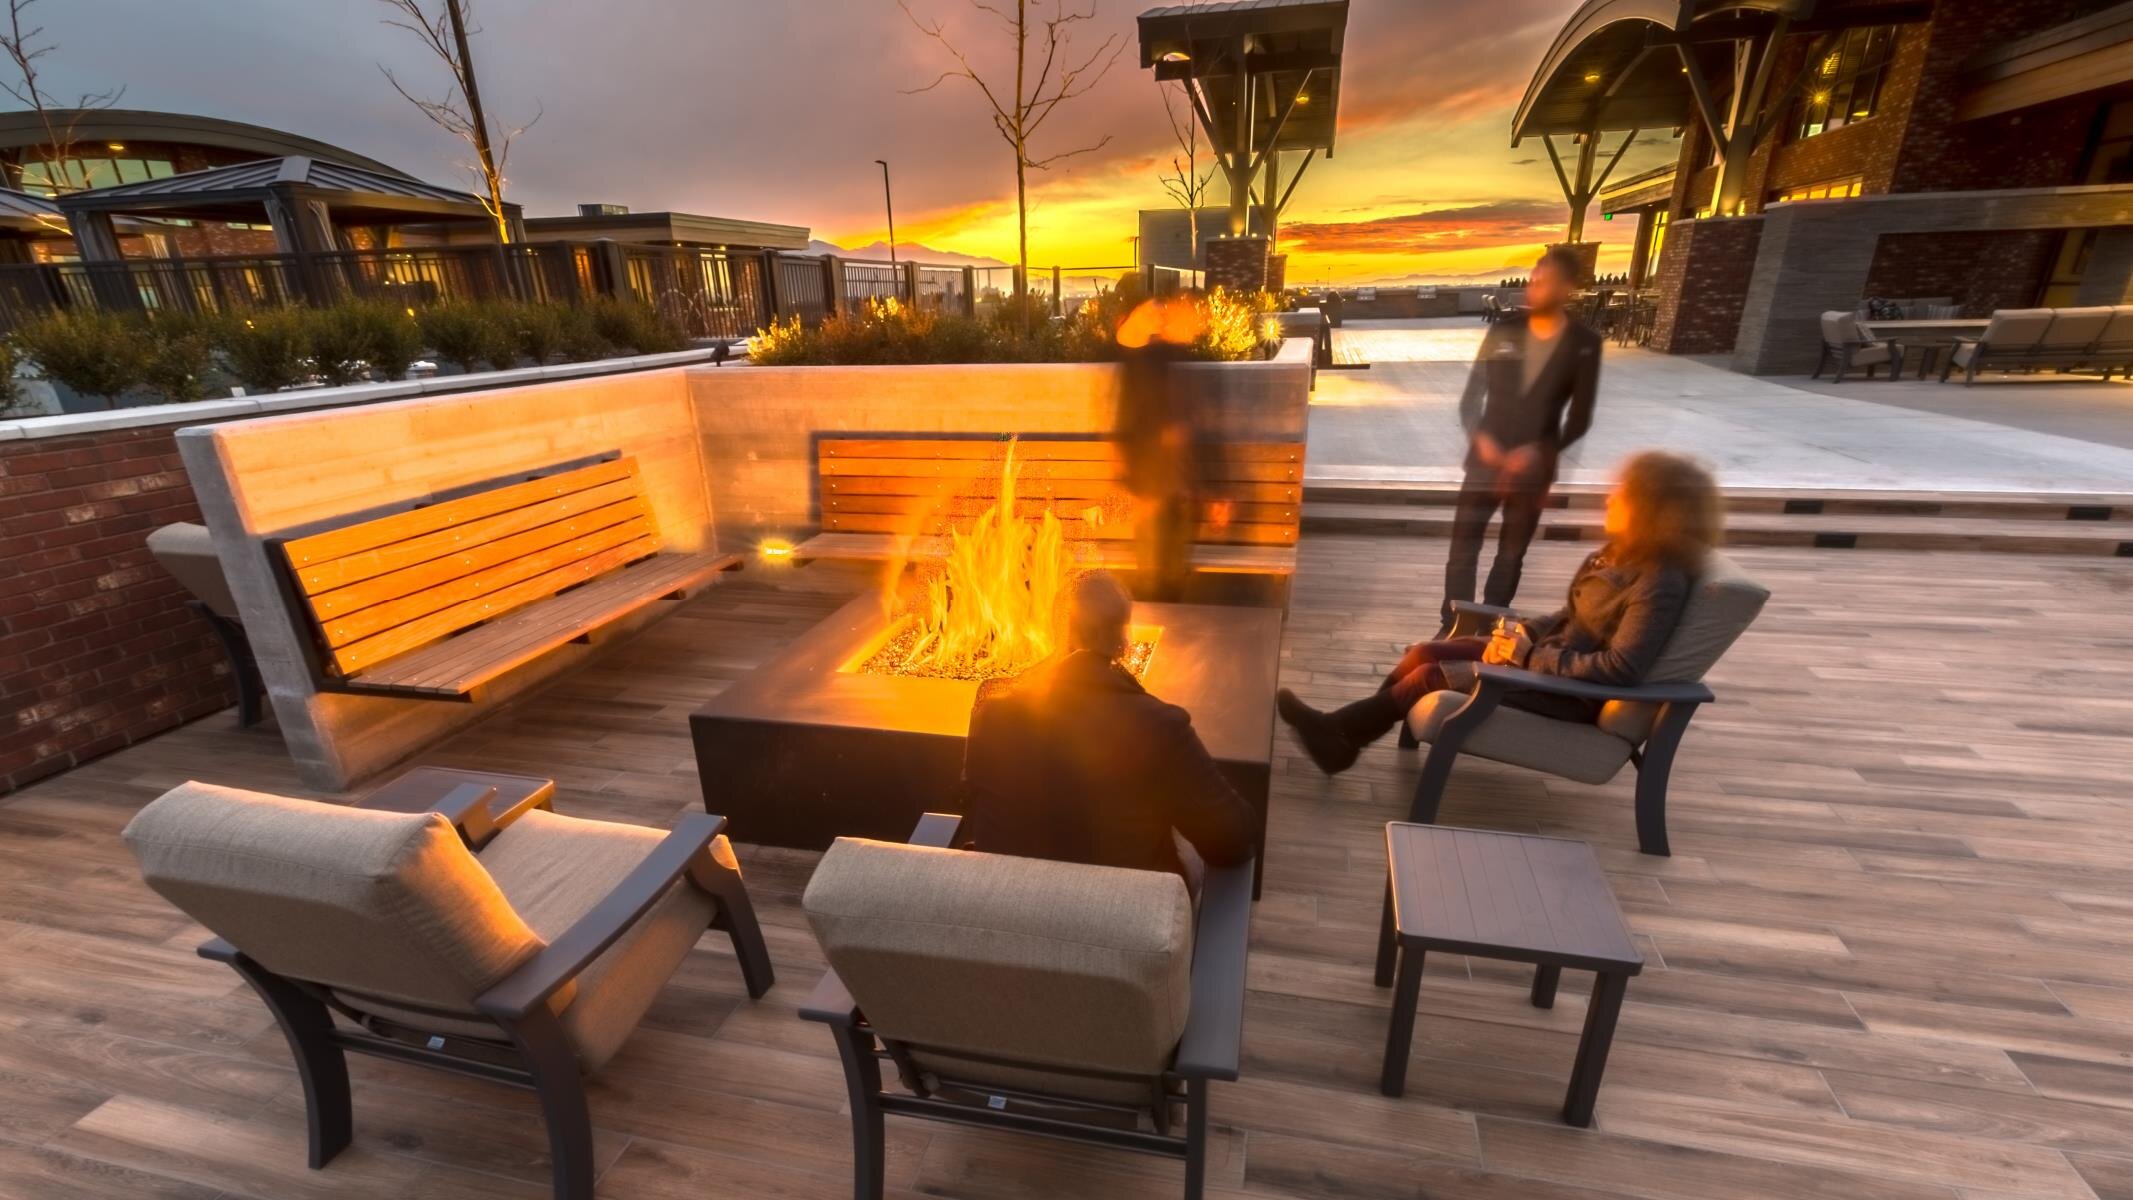  The outdoor spaces are helping residents deepen connection with friends, which is critical to a vibrant social community. 